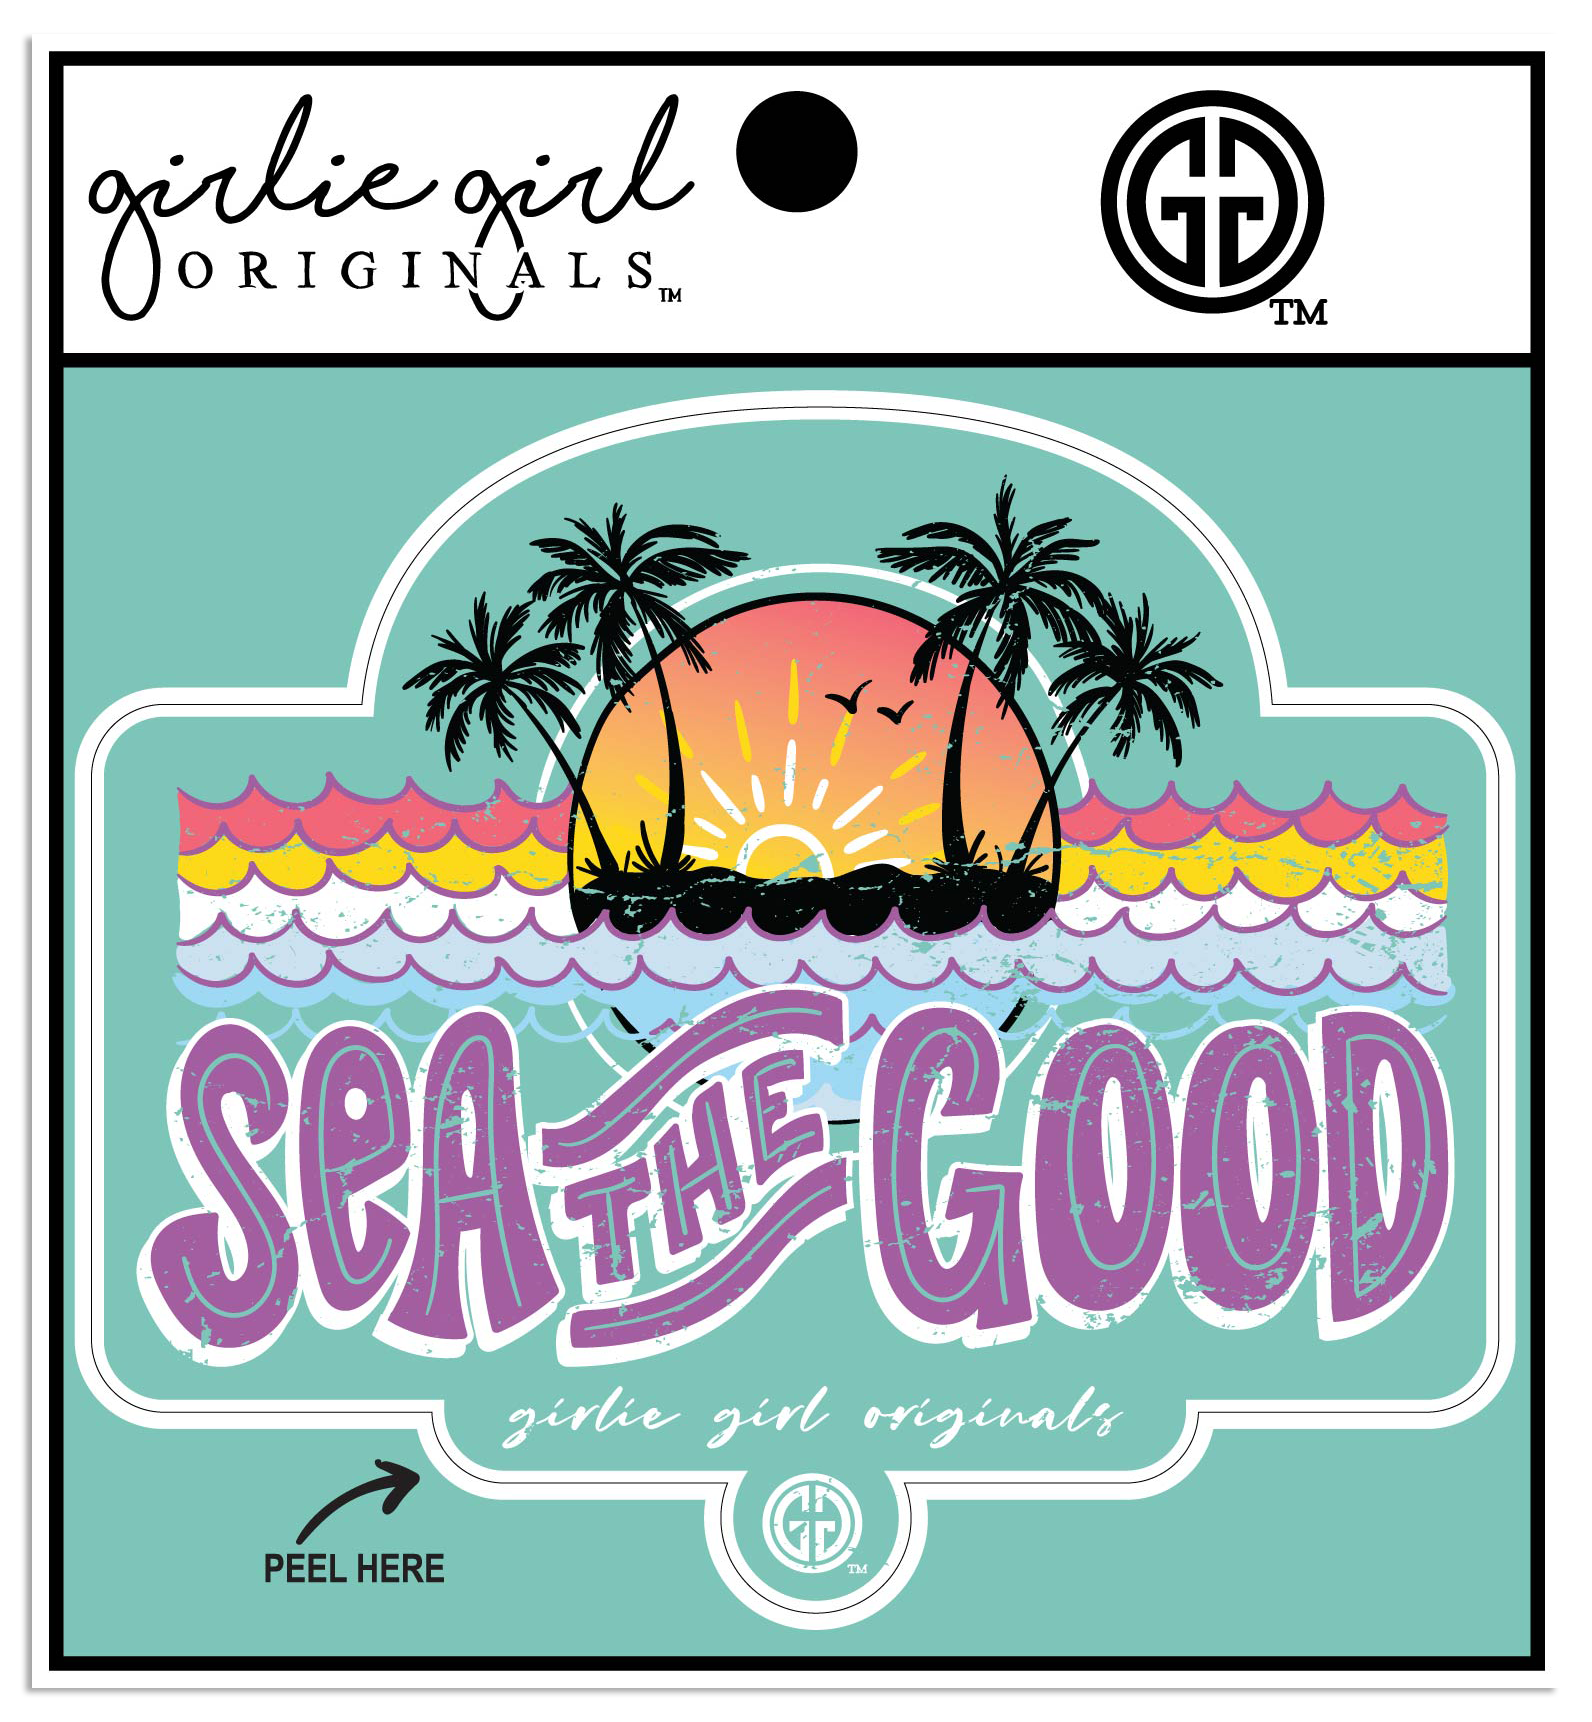 Decal/Sticker Sea the Good 2479